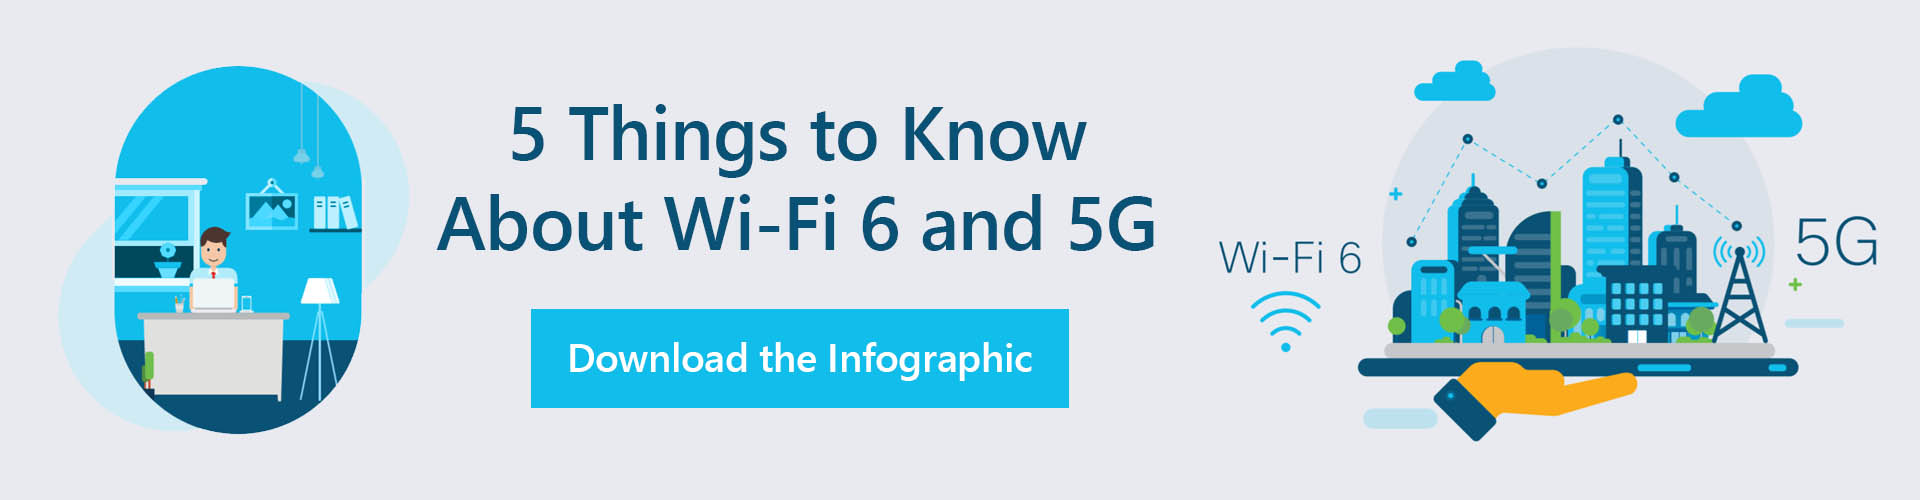 5 things to know about Wifi 6 and 5G